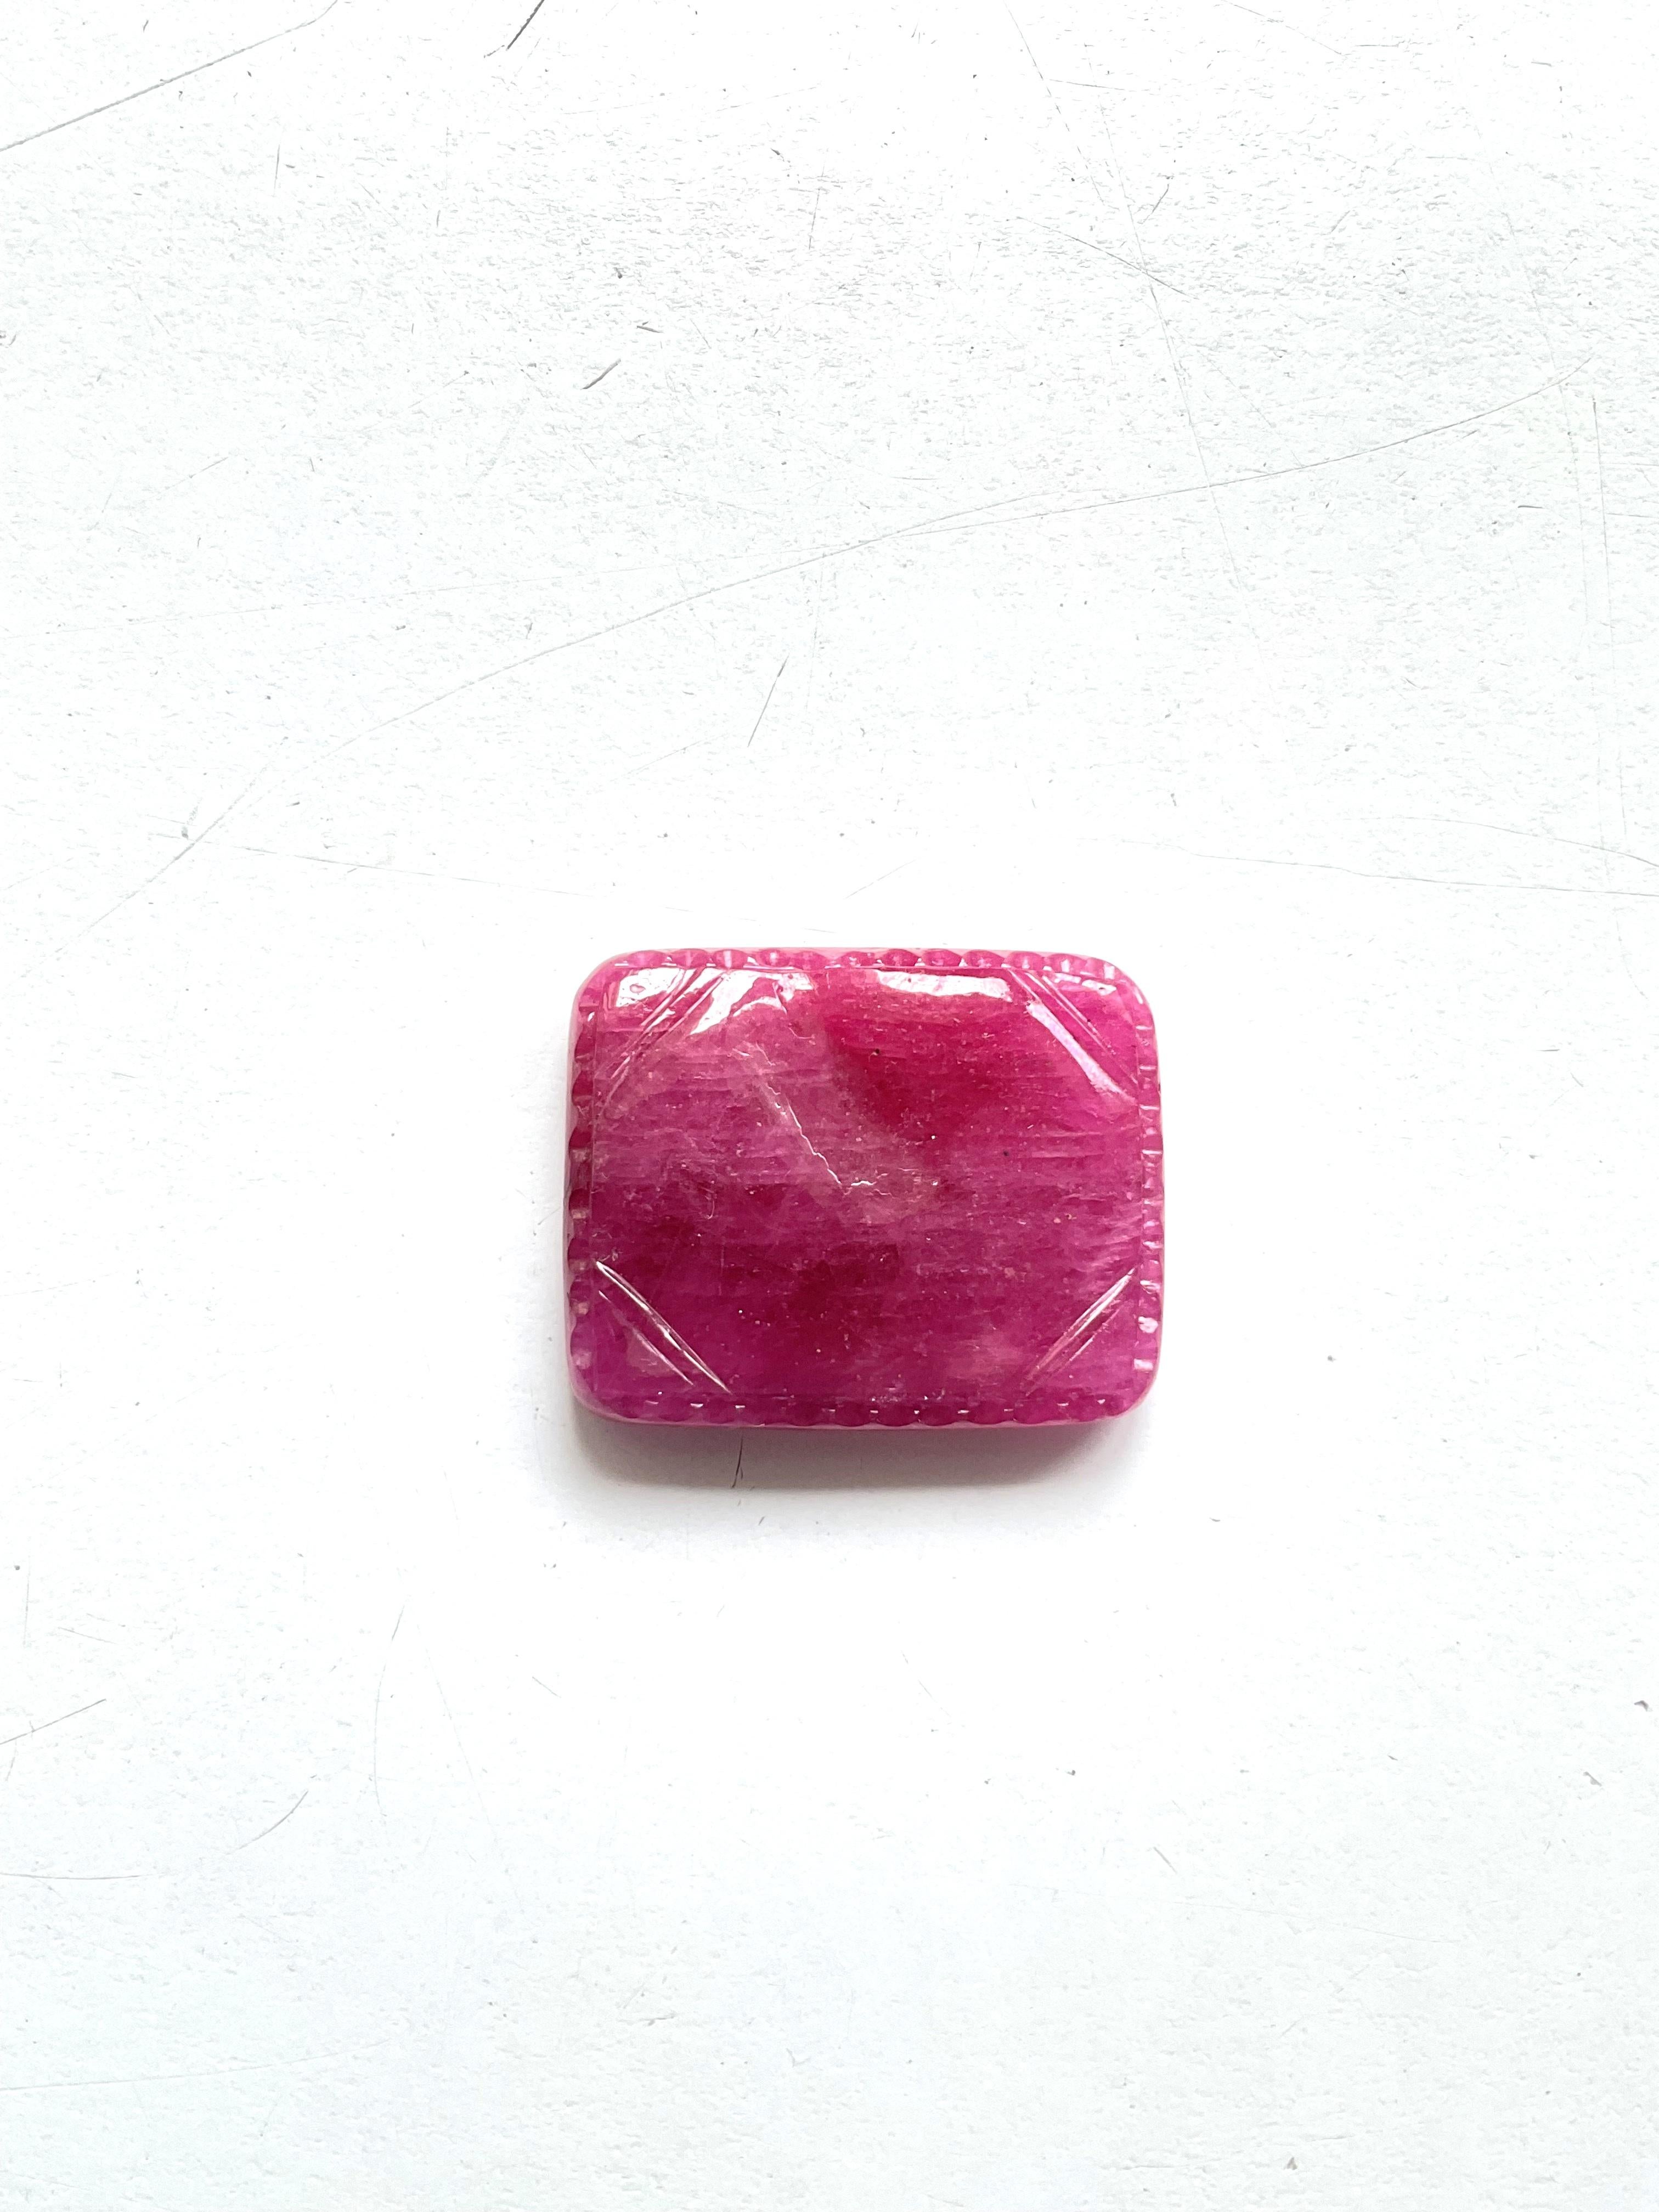 Certified 89.35 Carats Ruby Mozambique Carved Specimen Heated Natural Gemstone In New Condition For Sale In Jaipur, RJ